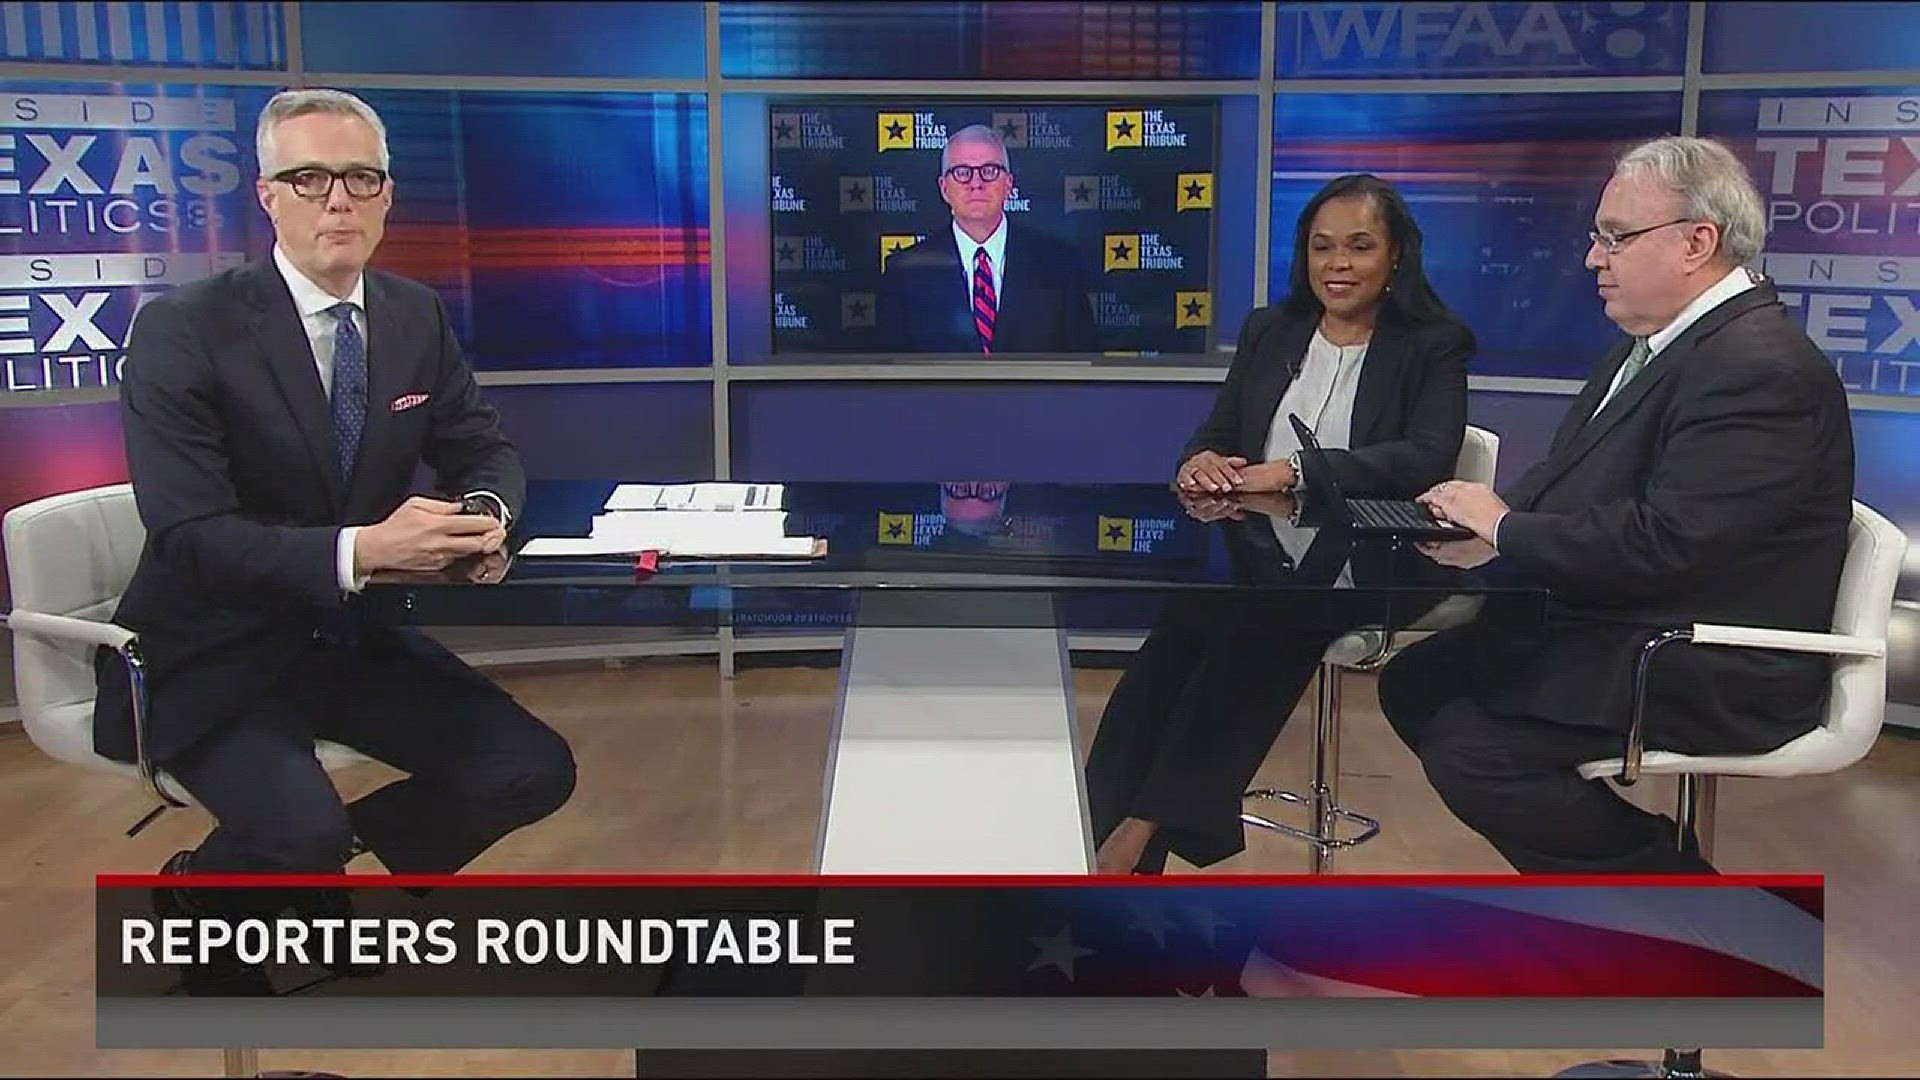 Reporters Roundtable puts the headlines in perspective each week. Bud and Ross returned along with Berna Dean Steptoe, WFAA's political producer, to discuss what the Democratic win in suburban Pittsburgh, Pennsylvania - a Trump stronghold - means for Demo